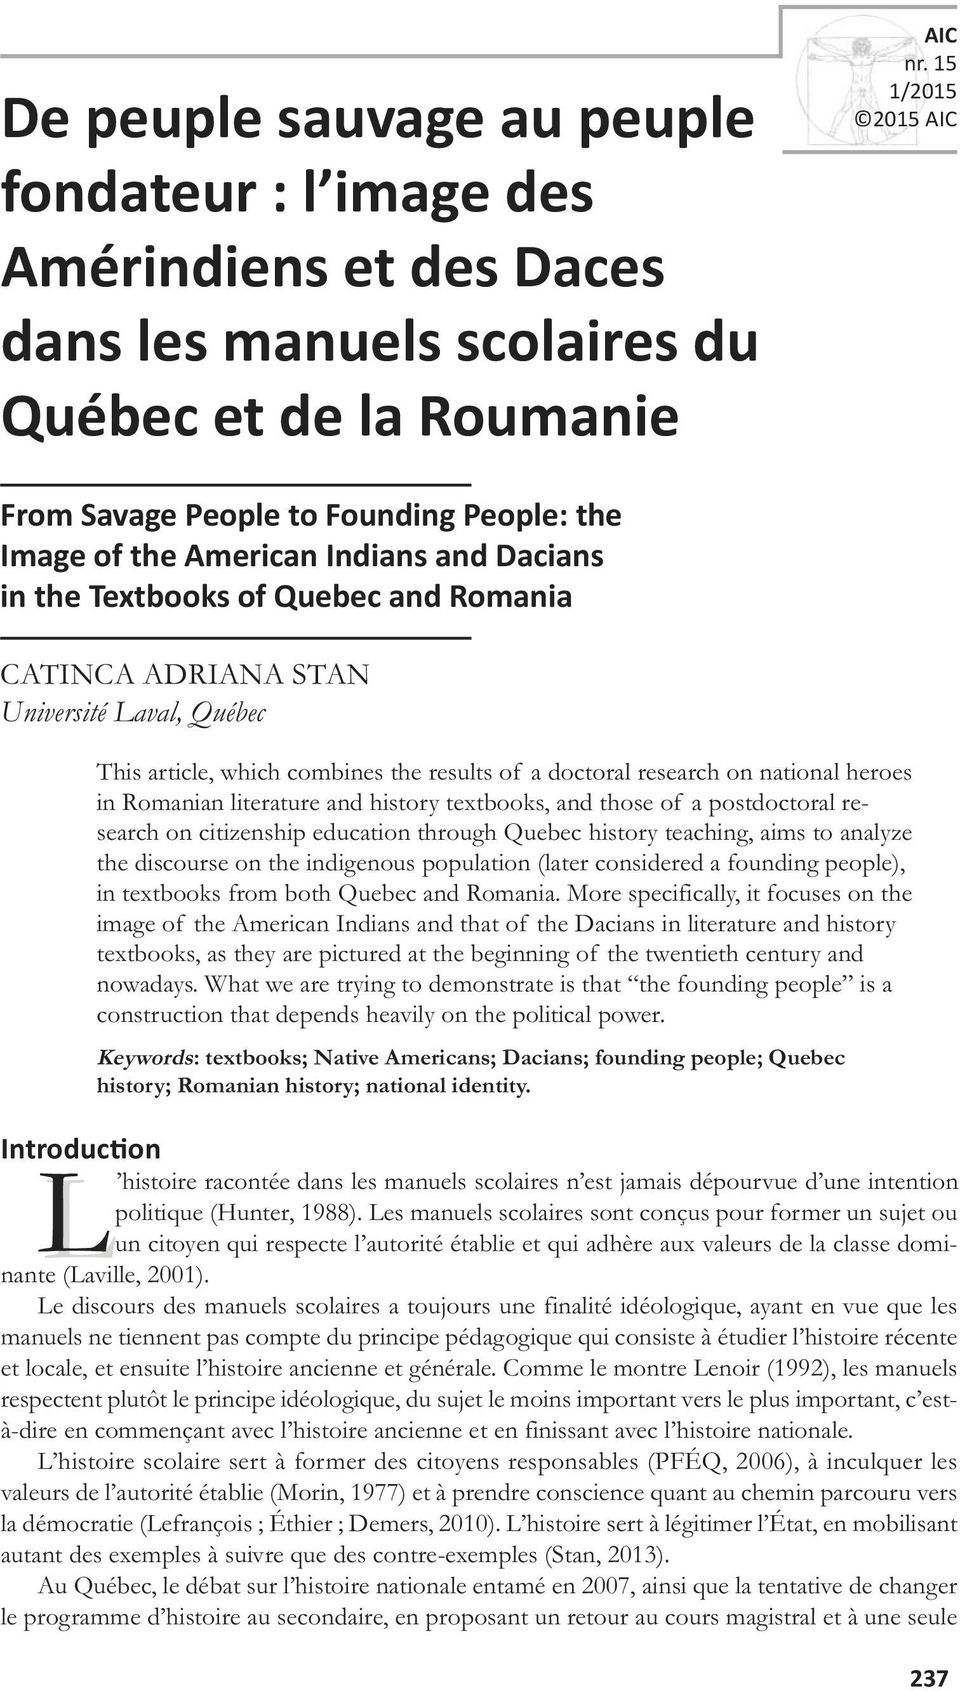 article, which combines the results of a doctoral research on national heroes in Romanian literature and history textbooks, and those of a postdoctoral research on citizenship education through